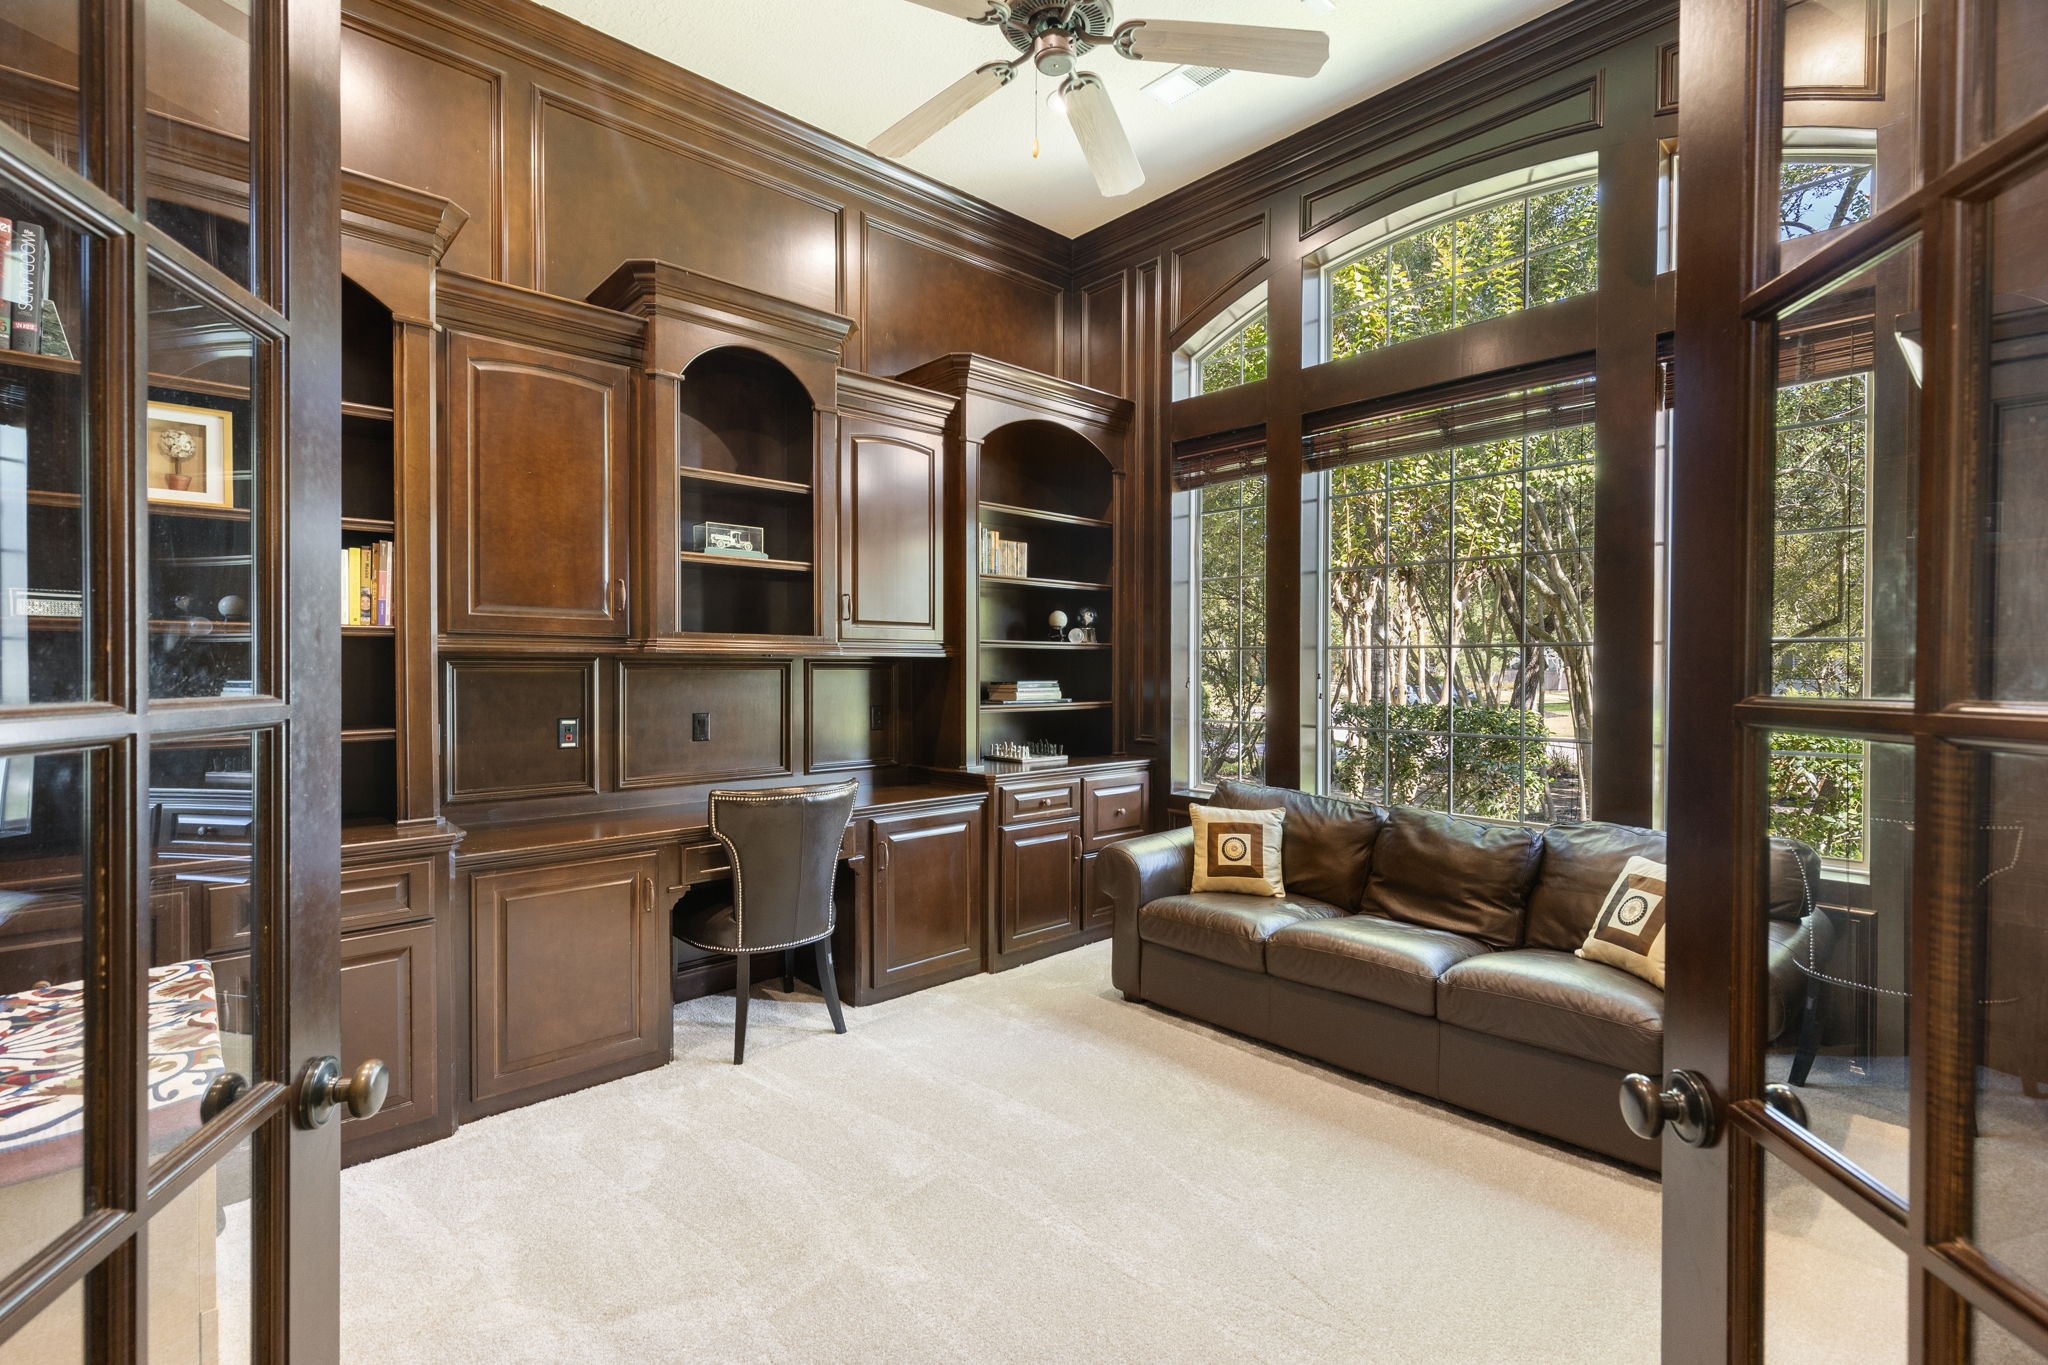 The well-appointed study is situated just off the entry and creates a refined workspace with custom built in desk and bookcases, high ceilings and new carpet.